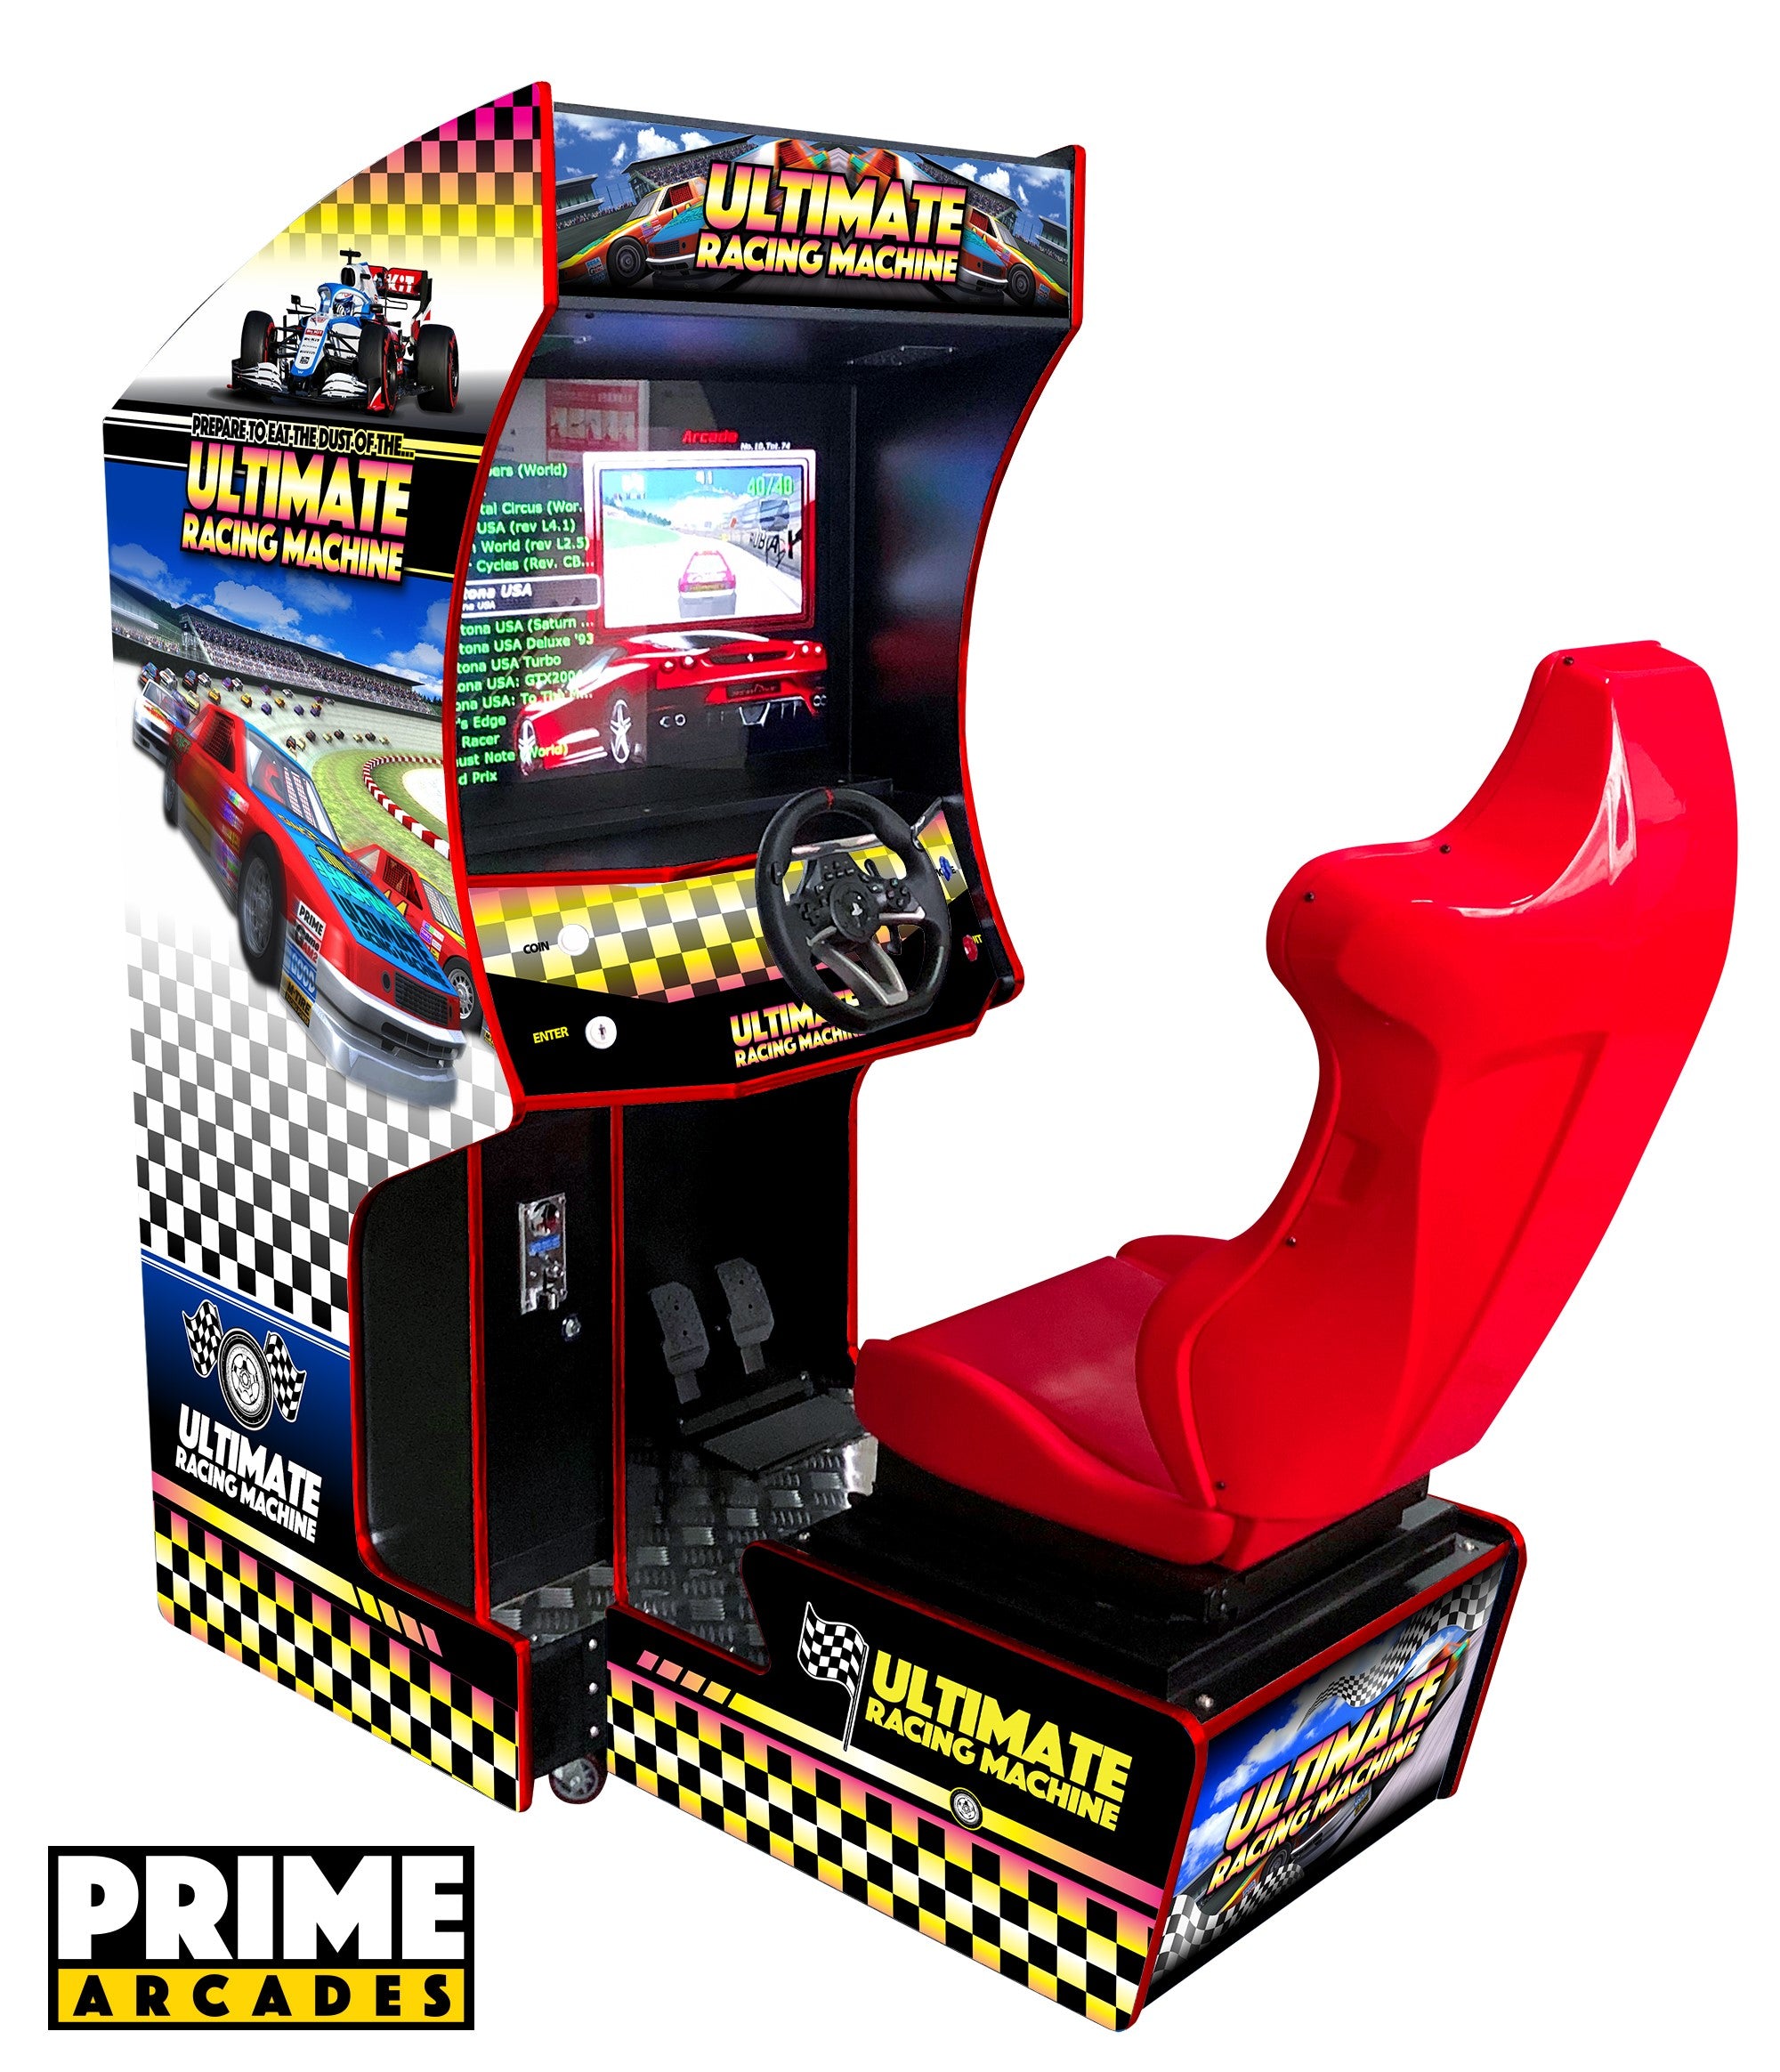 135 Racing Games in 1 Arcade Machine with Seat Prime Arcades Inc